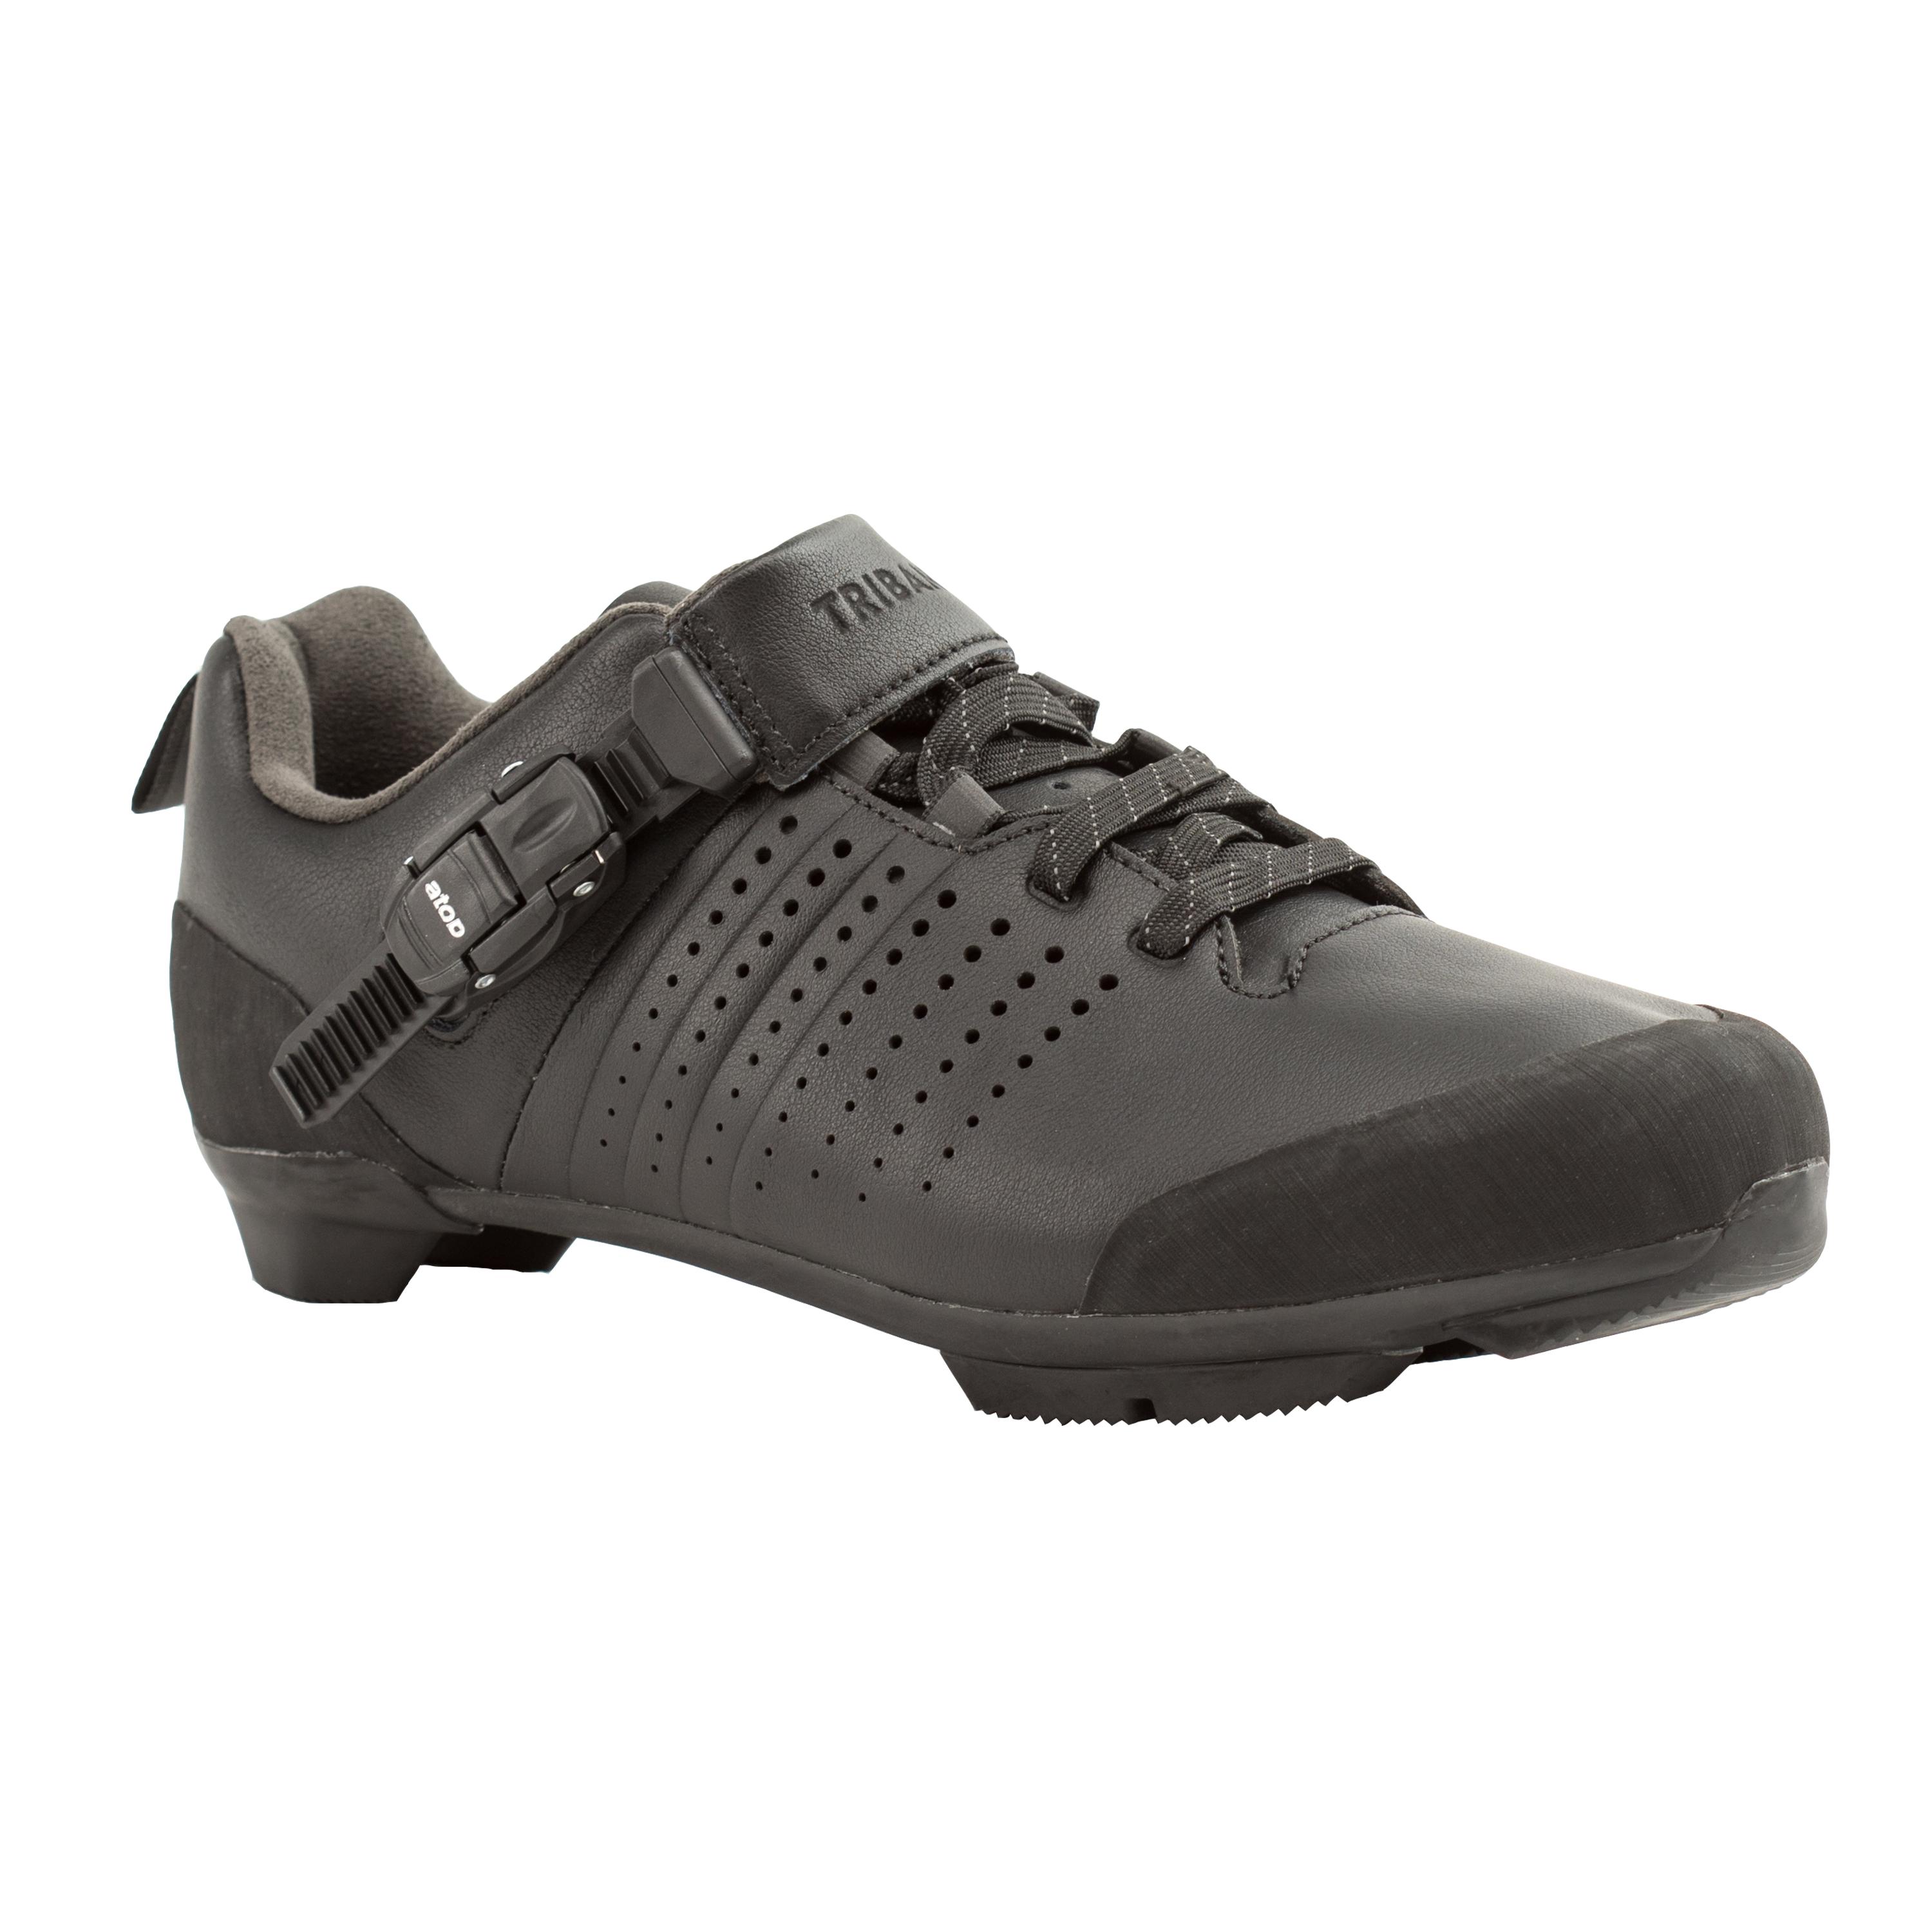 Leather Lace-Up Cycling Shoes - GRVL 520 SPD Black - TRIBAN